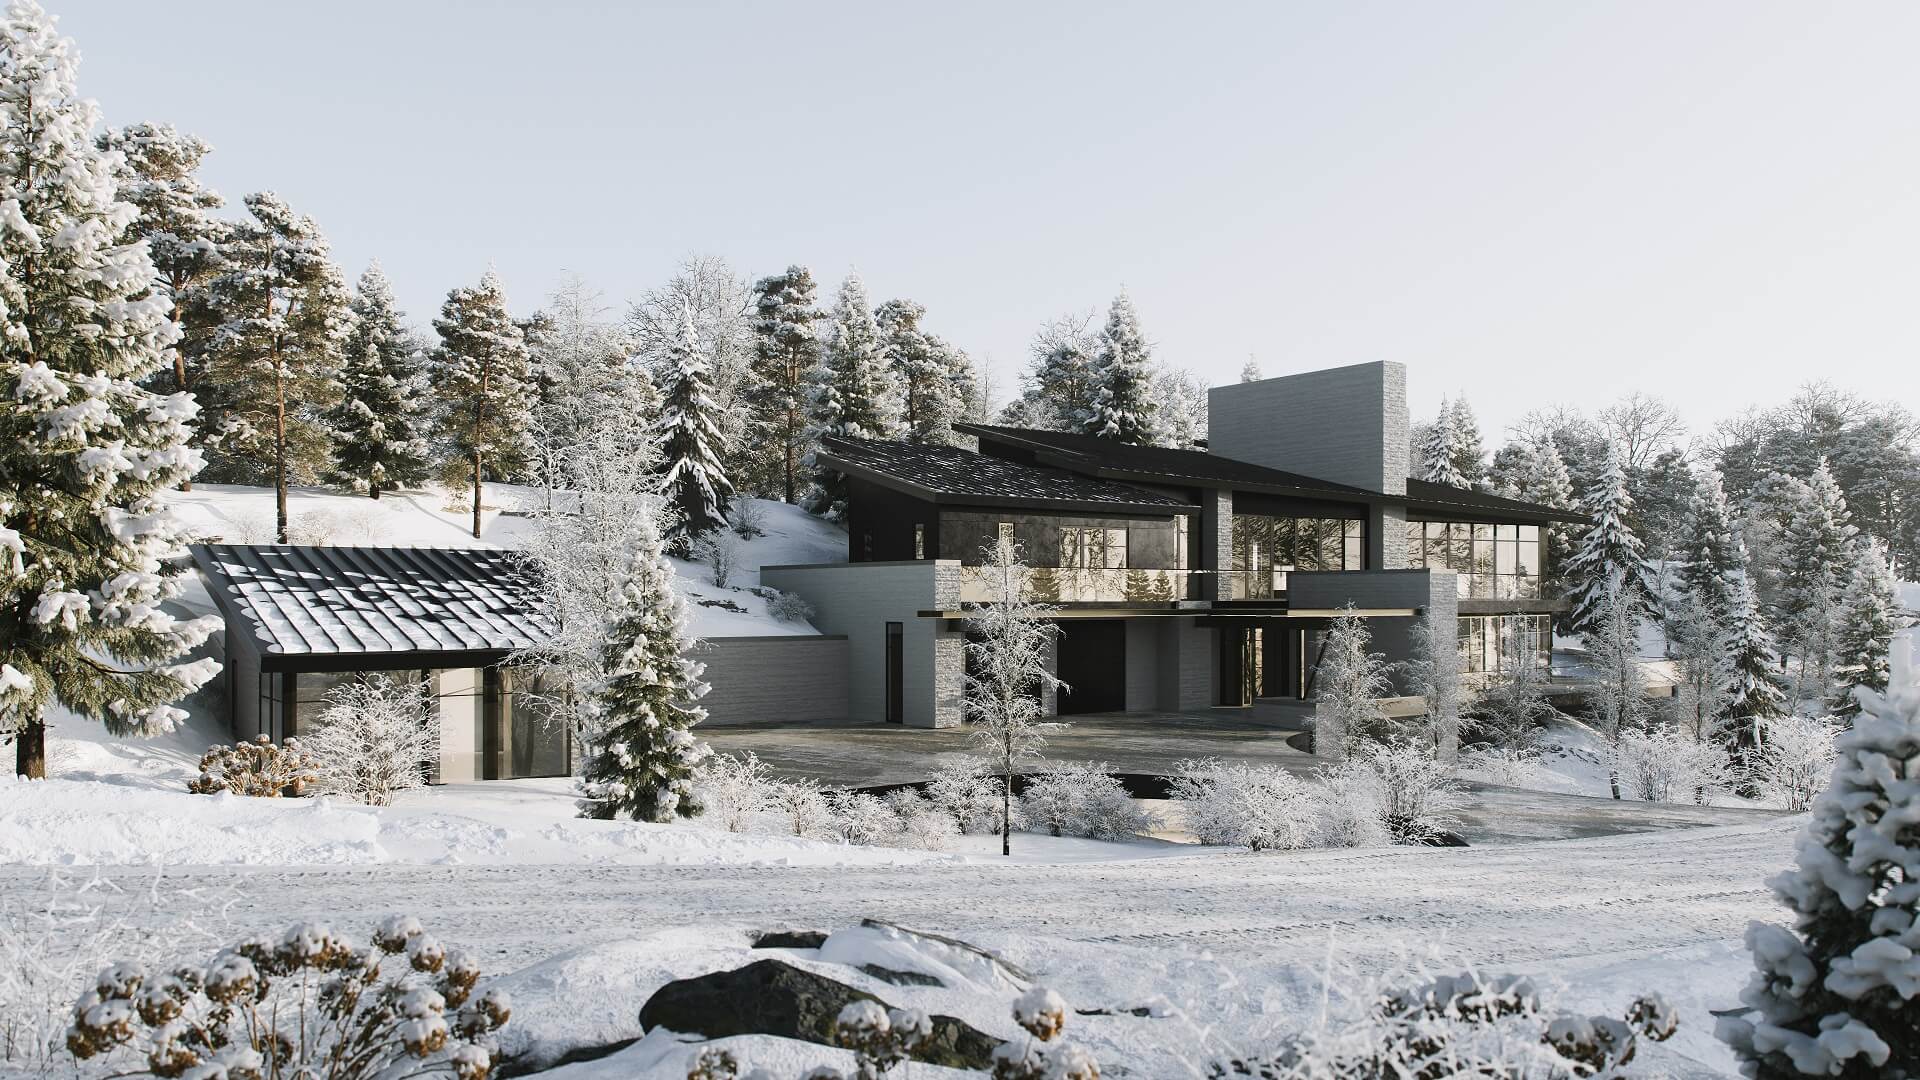 3D Render for a Luxury House in winter Mountains